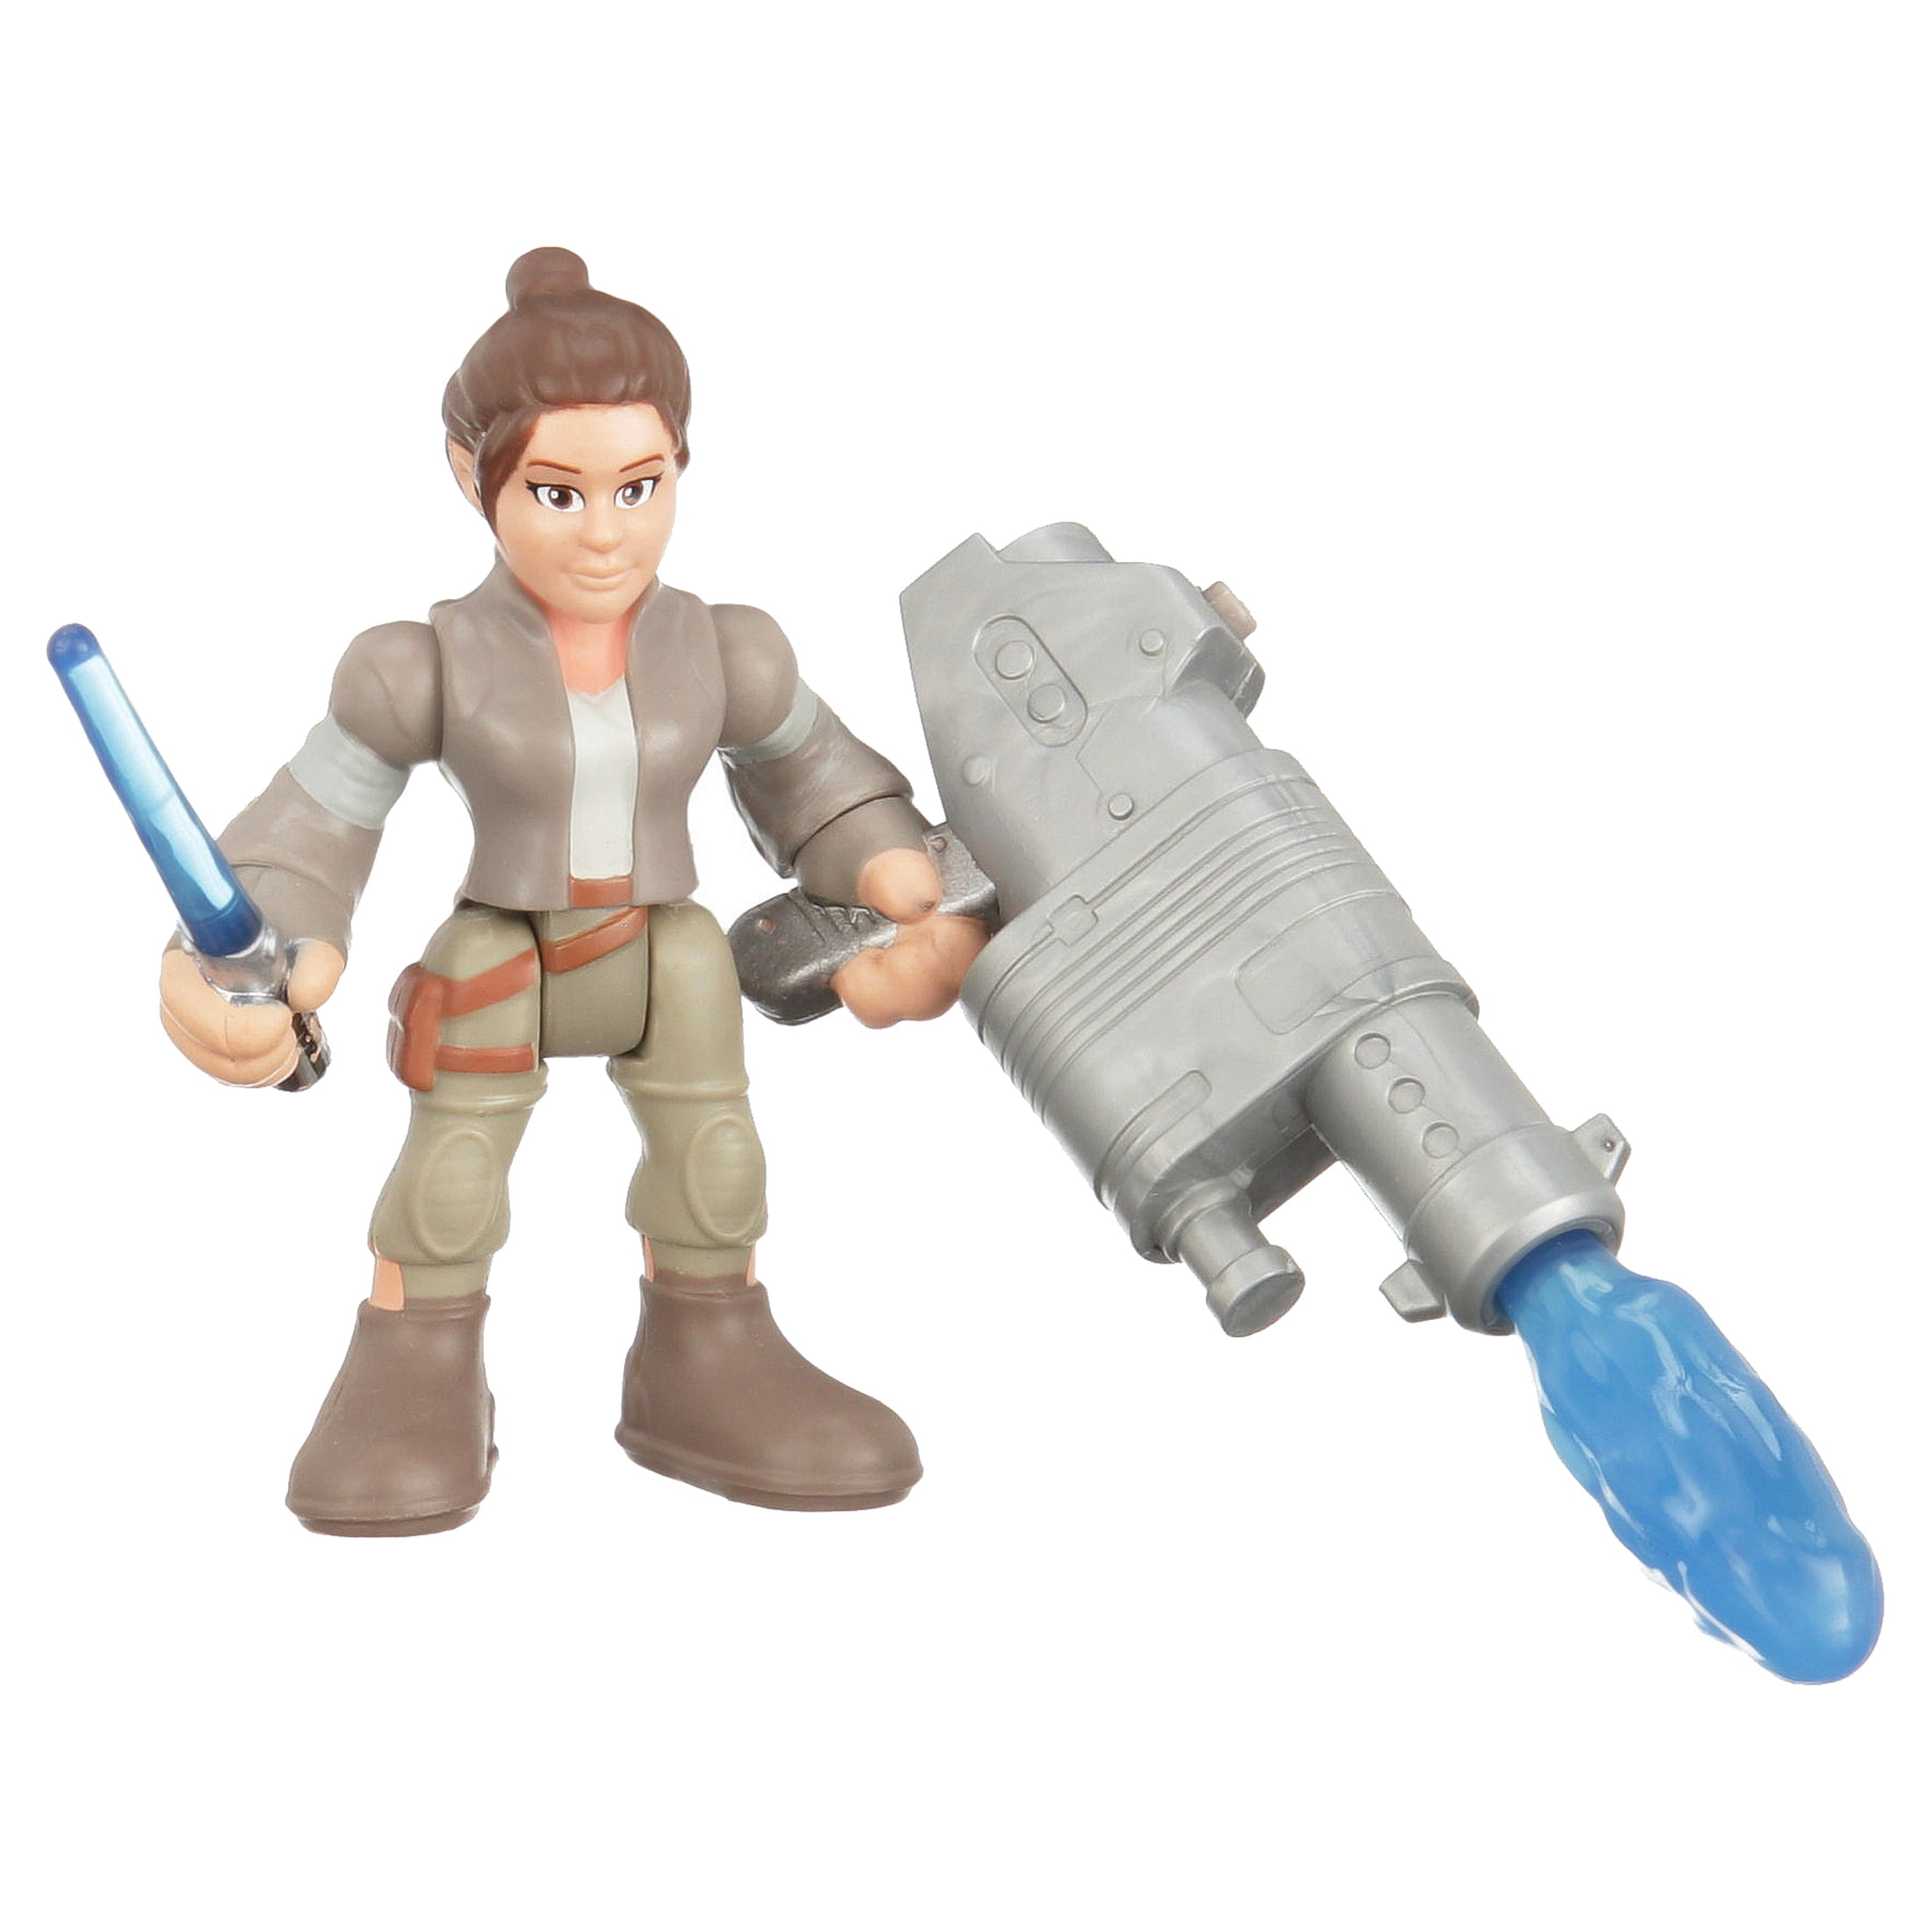 Up To 20 kinds Playskool Star Wars Galactic Heroes Action Figures Your Choice 